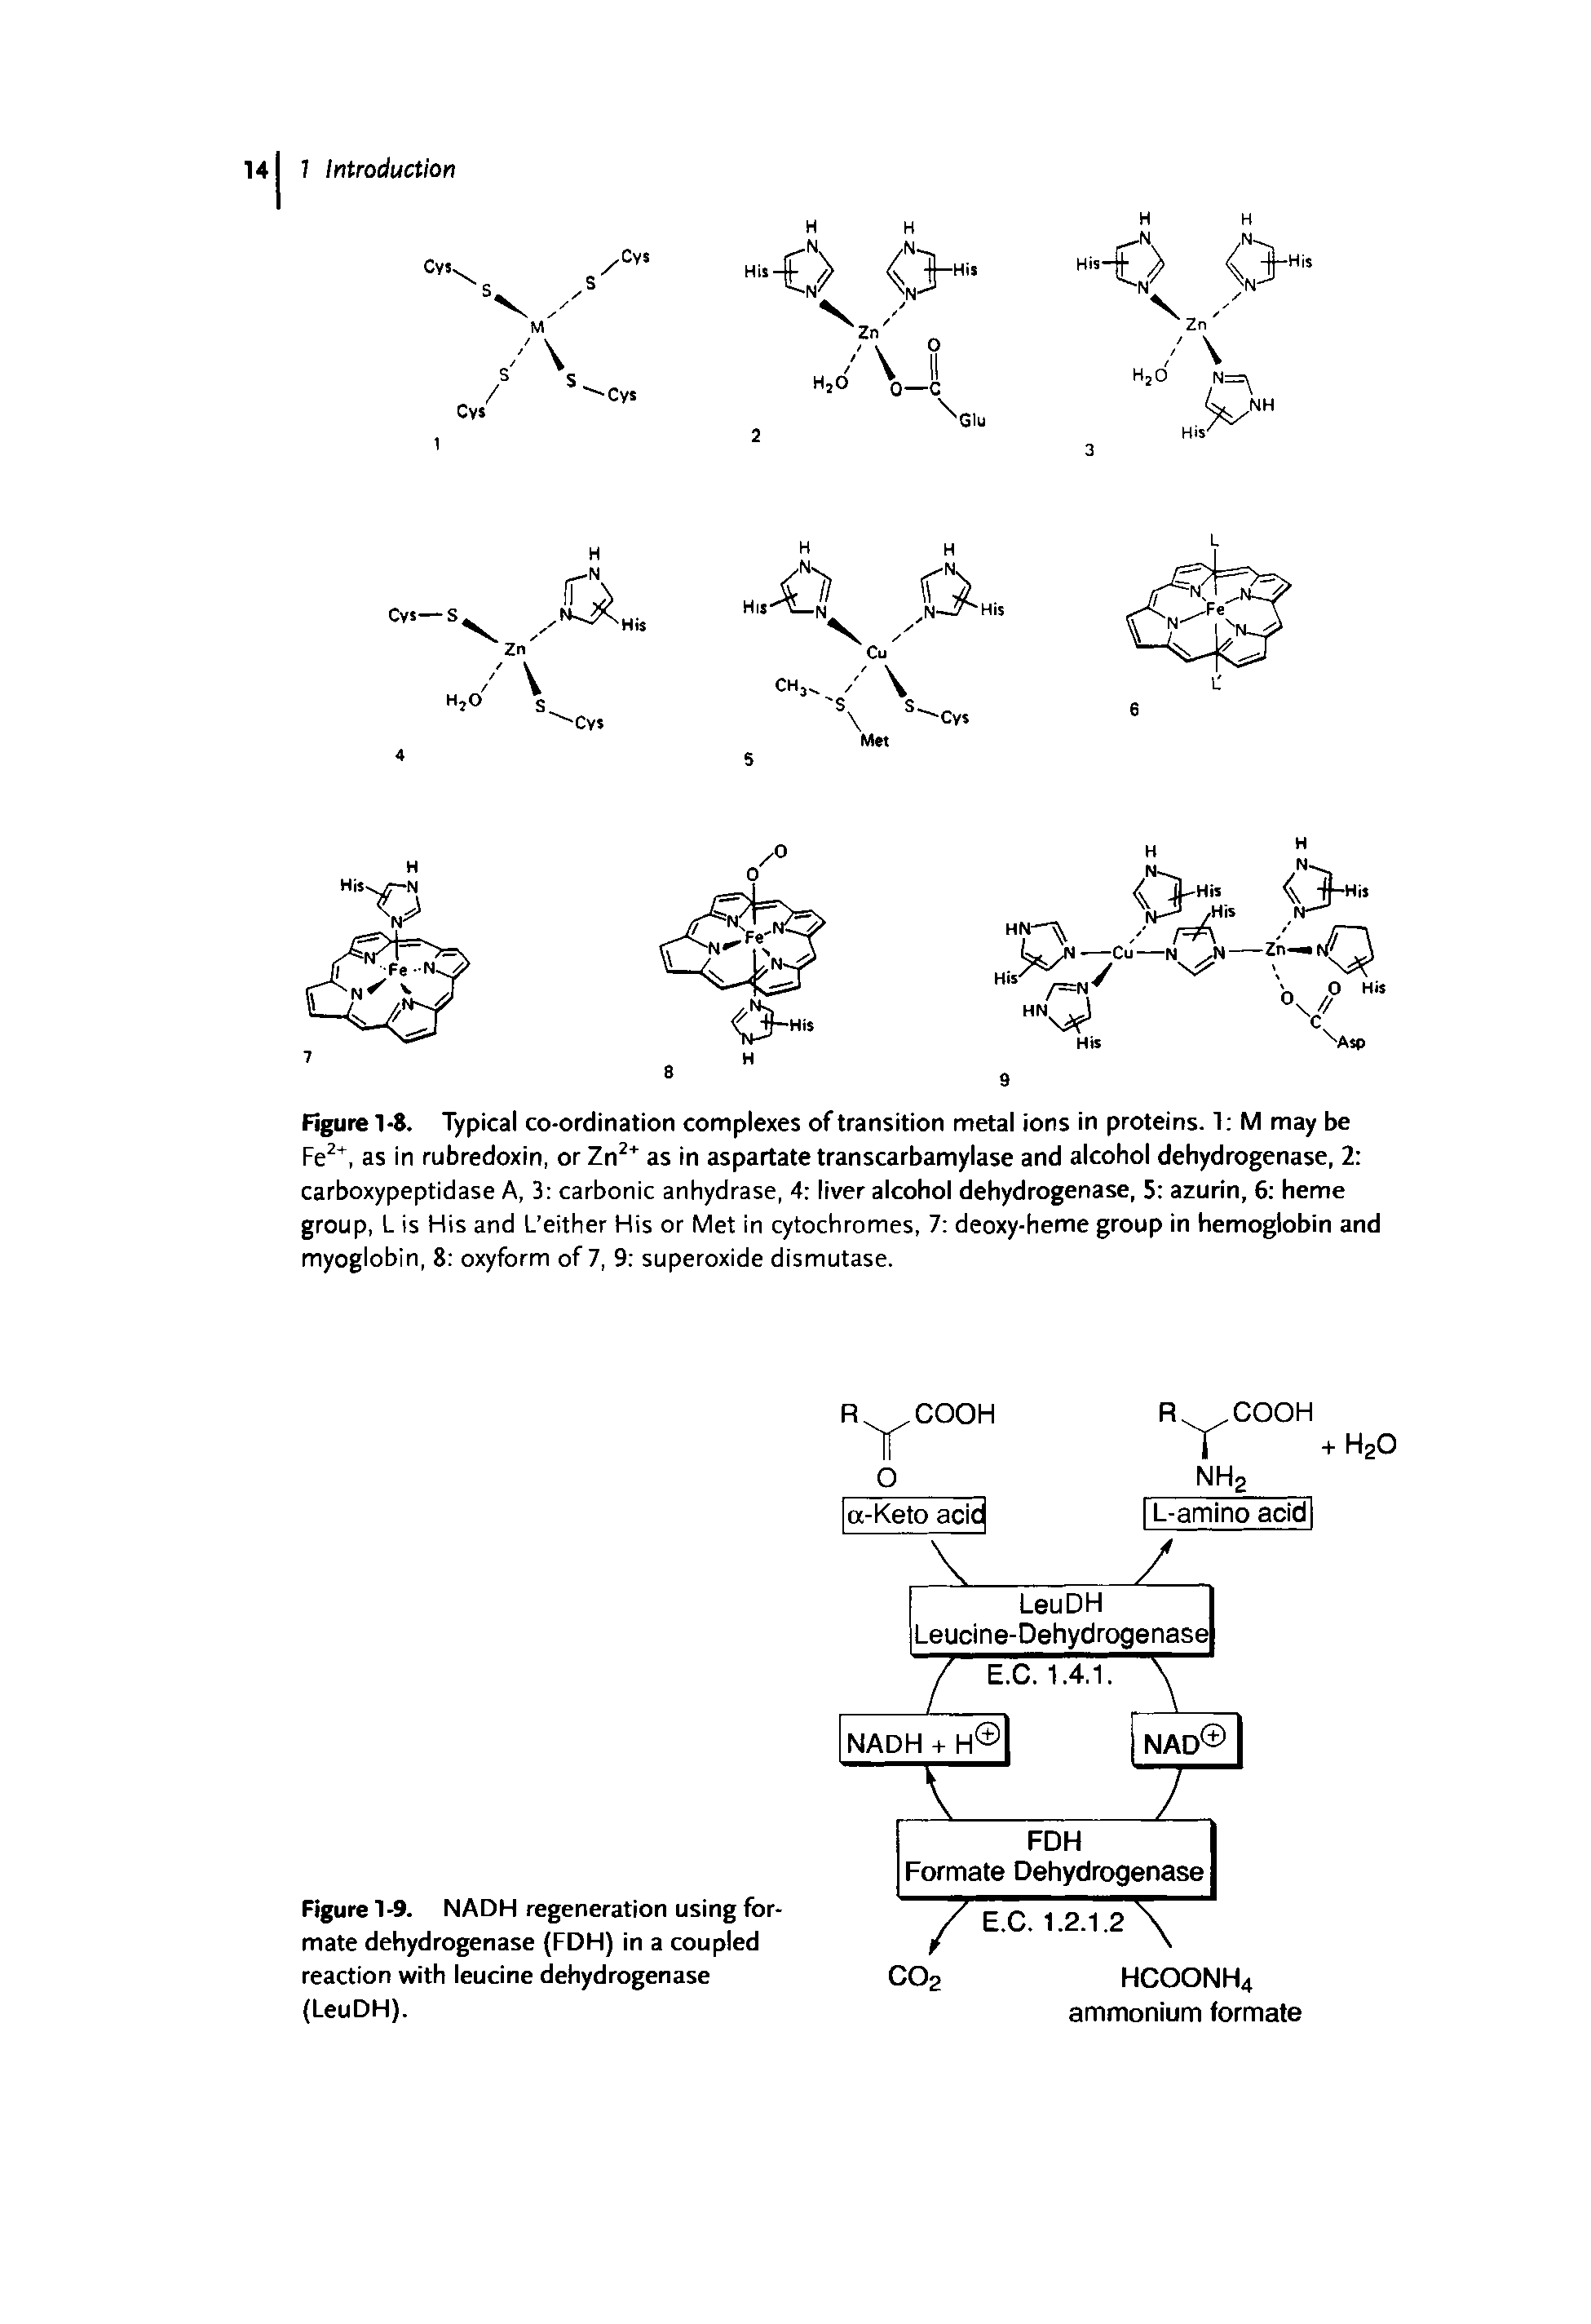 Figure 1-9. NADH regeneration using formate dehydrogenase (FDH) in a coupled reaction with leucine dehydrogenase (LeuDH).